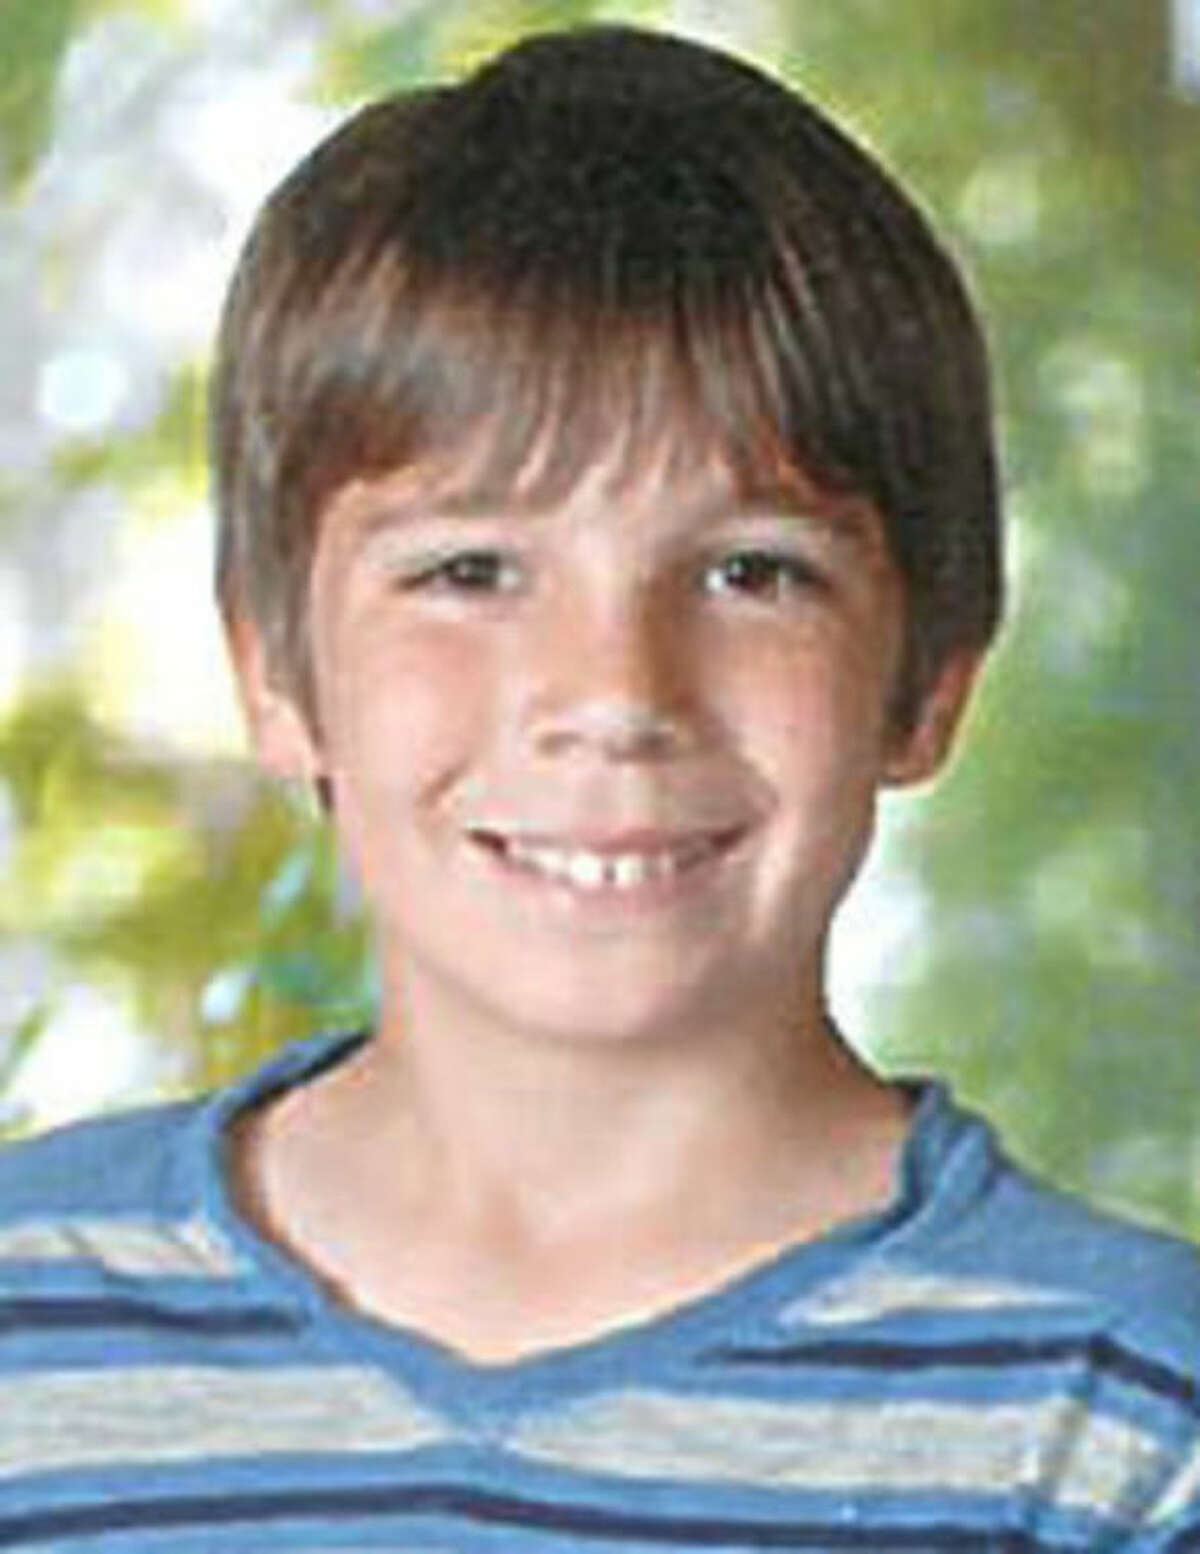 A photo released by the Riverside County Sheriff's Department is of Terry Dewayne Smith Jr., 11, an autistic boy who went missing from his Manifee, Calif., home on Saturday, July 6, 2013. Hundreds of people will resume the search today Tuesday July 9,2013, for Smith in Riverside County, where temperatures have topped 100 degrees. (AP Photo/Riverside County Sheriff's Department)